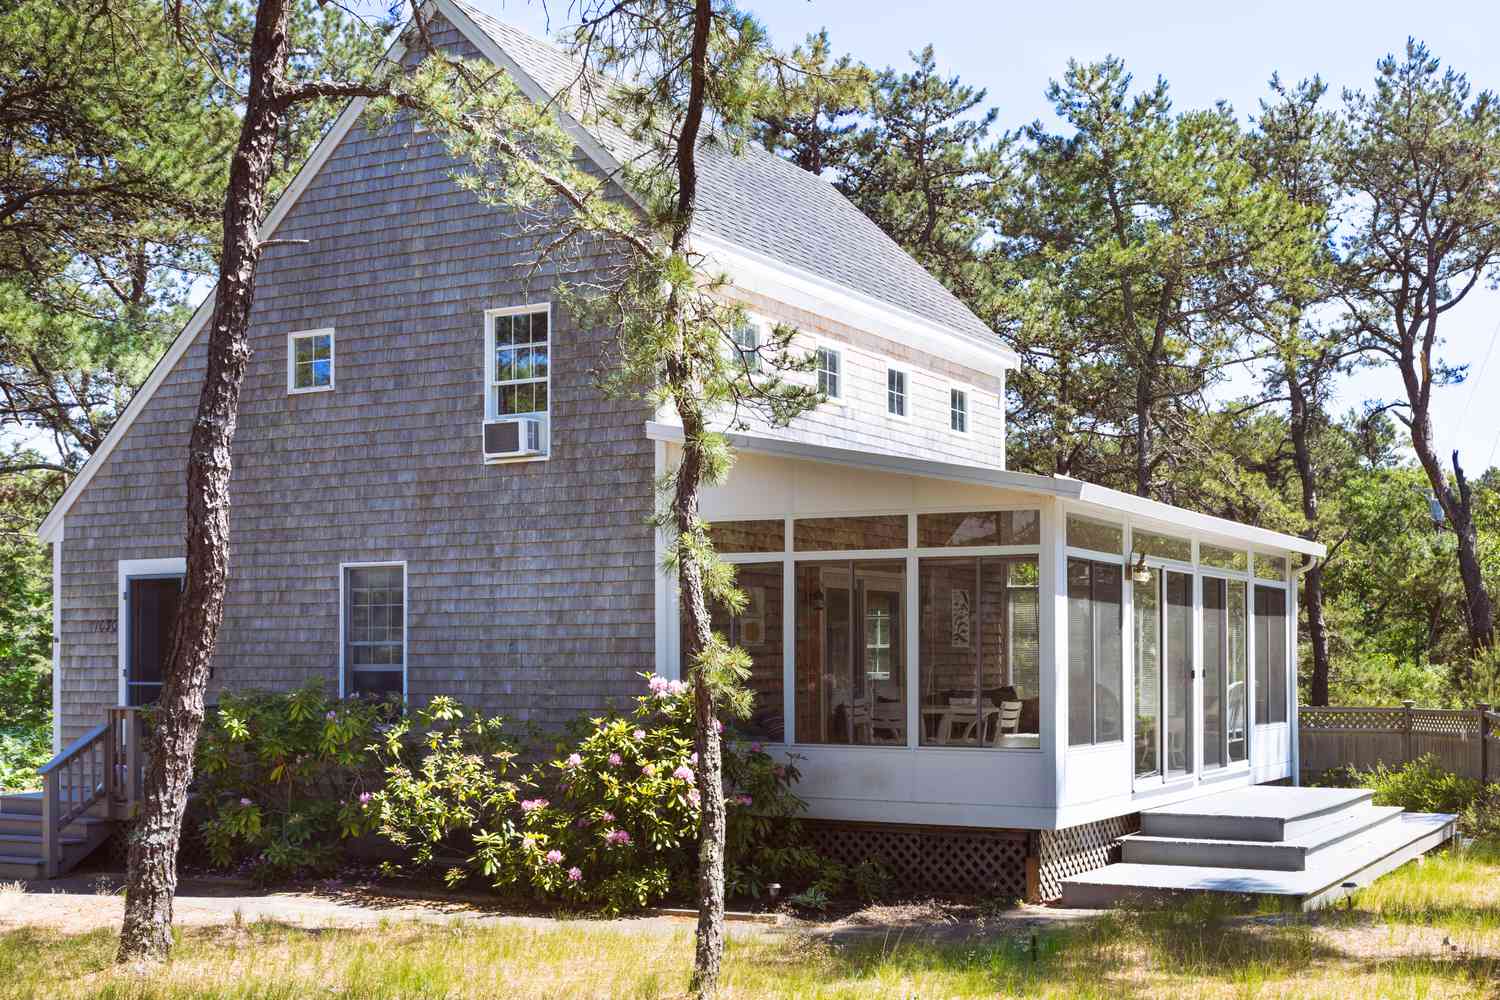 The History Behind The Saltbox House And Its Unique Roofline